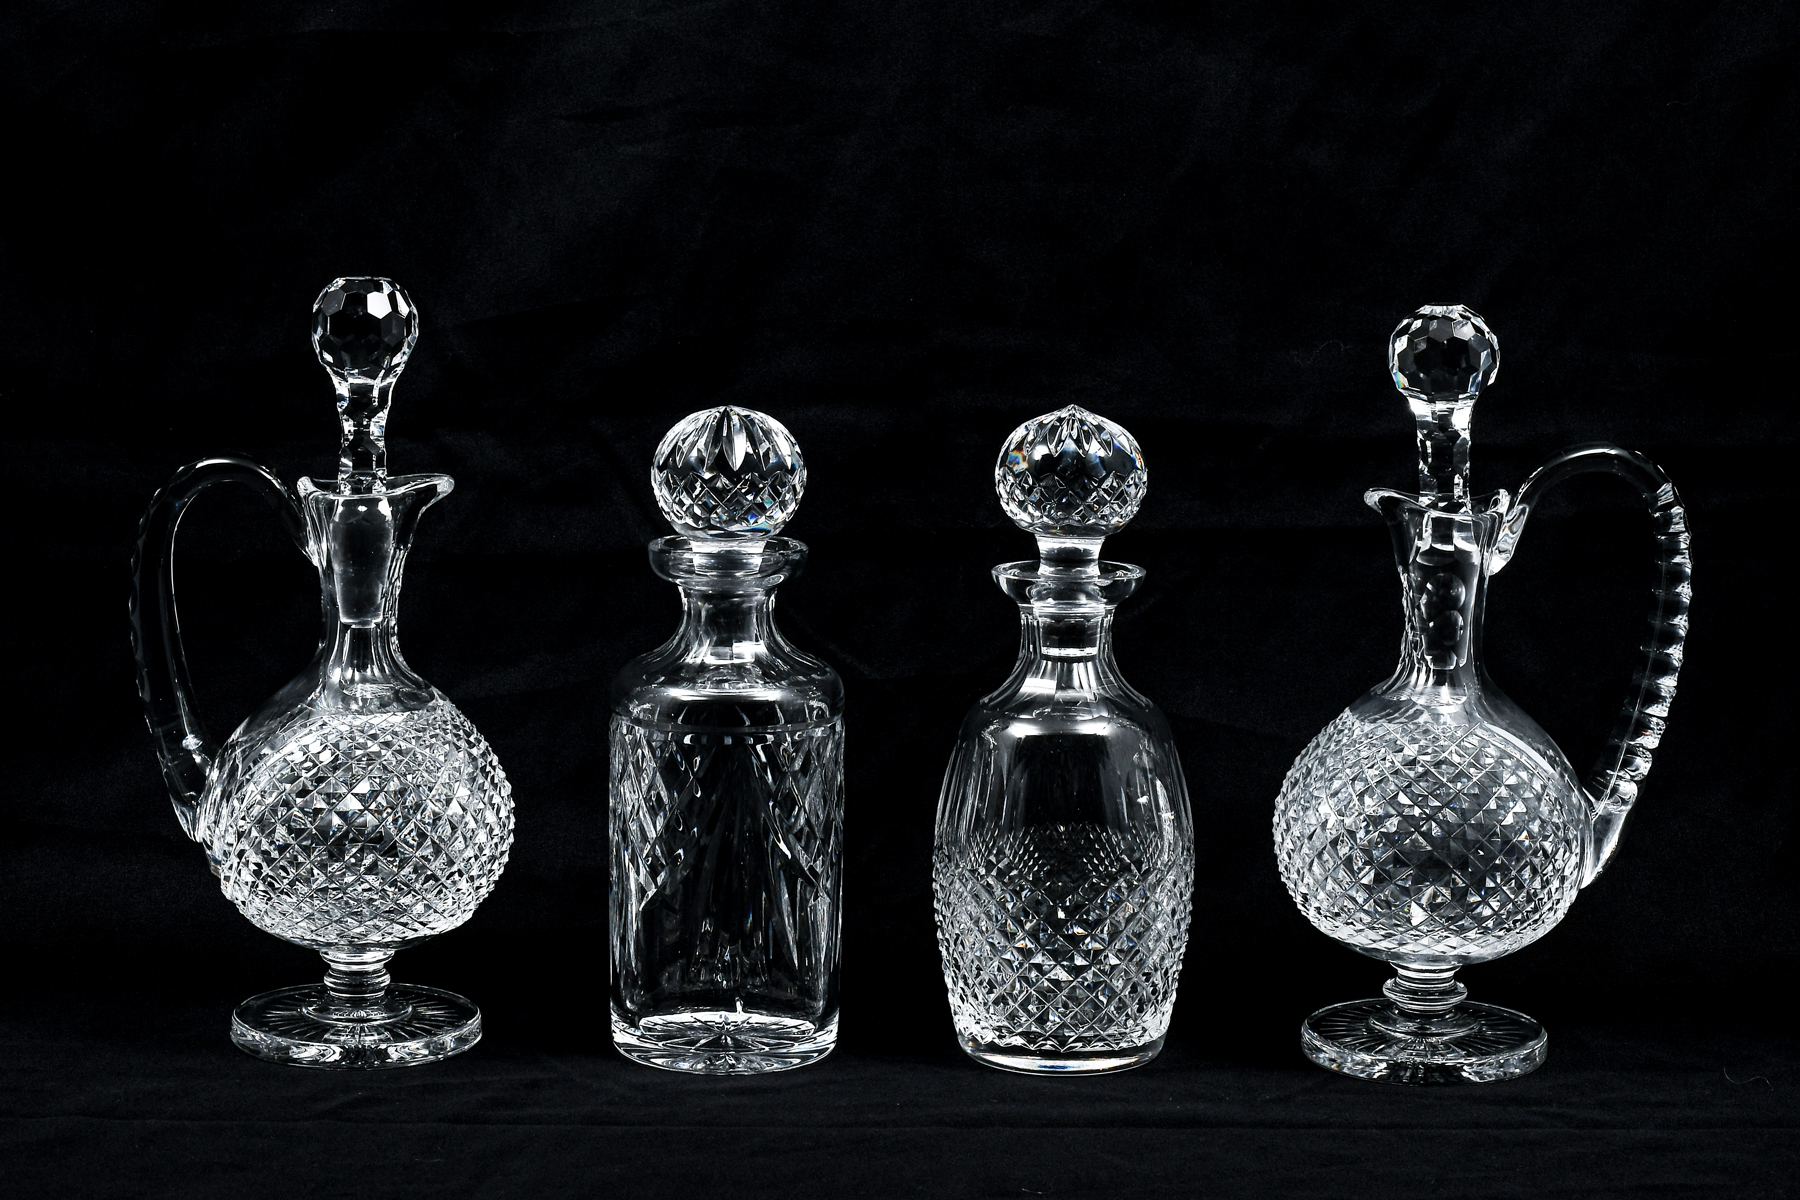 4 WATERFORD CRYSTAL DECANTERS: